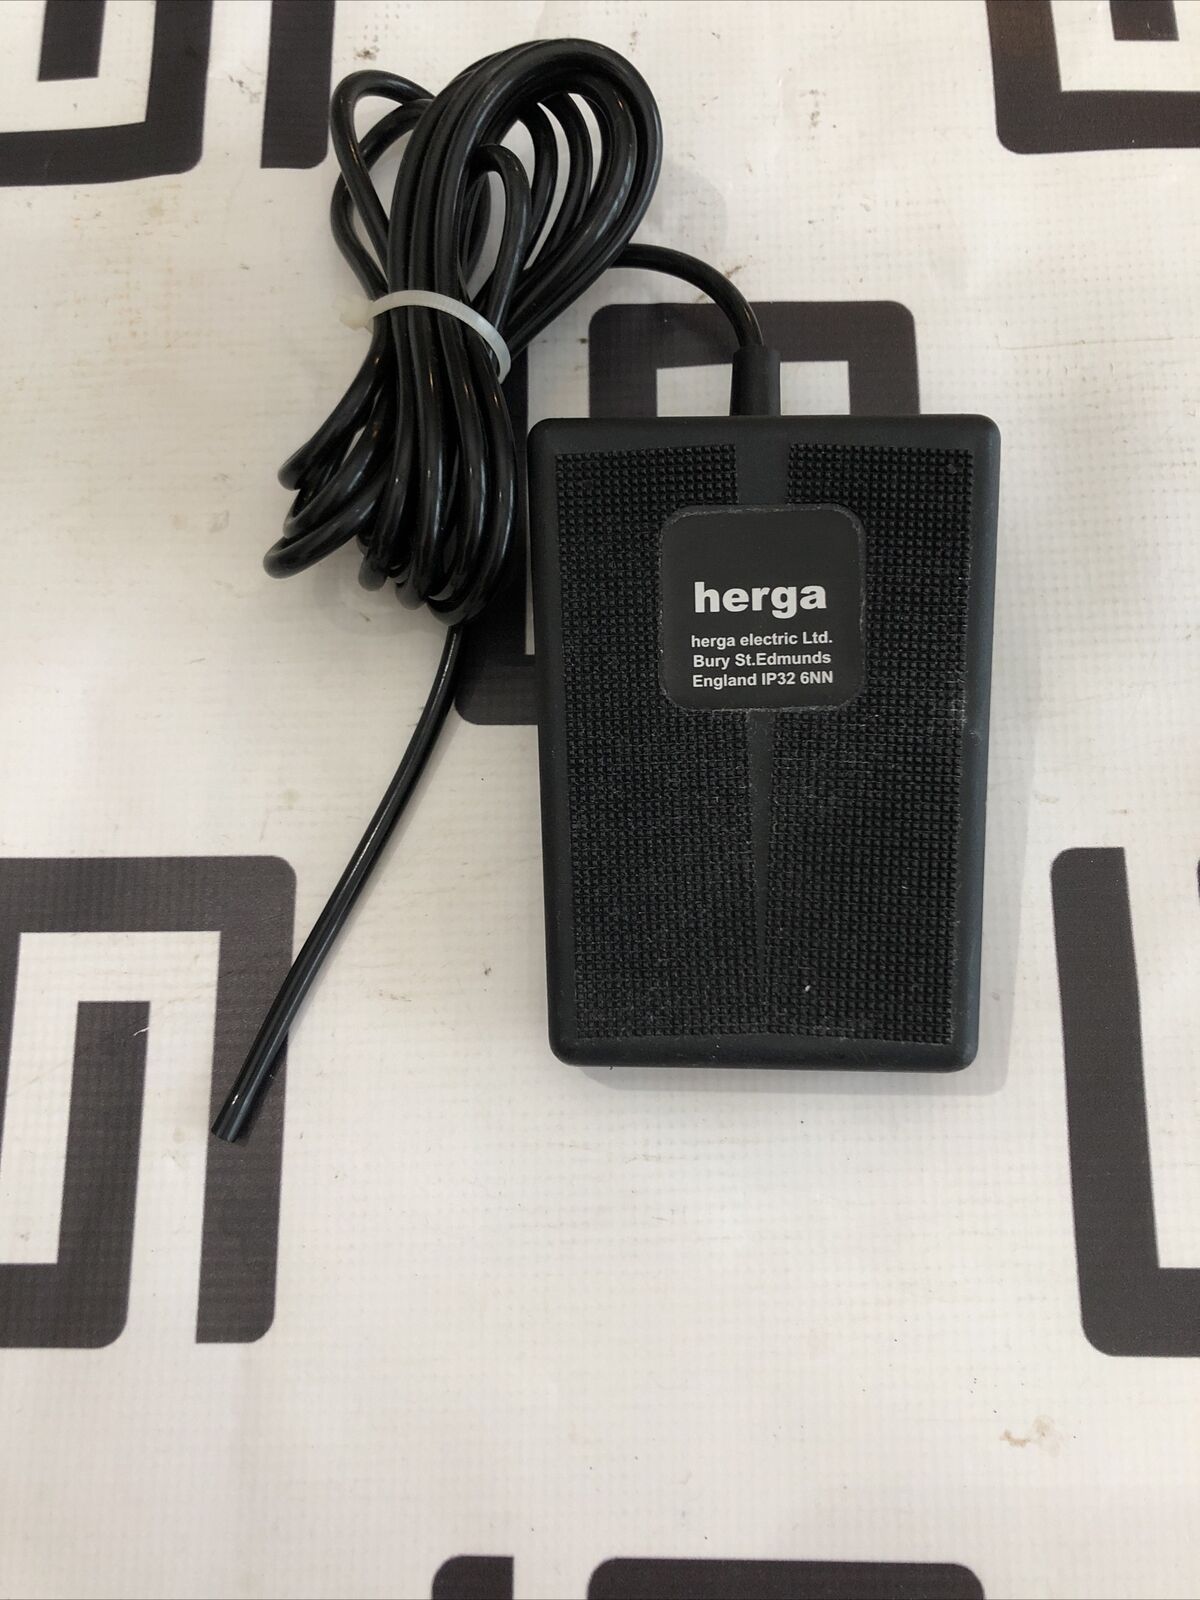 Herga 6210-0001 Light Duty Air Foot Switch Pedal Footswitch Footpedal Warranty